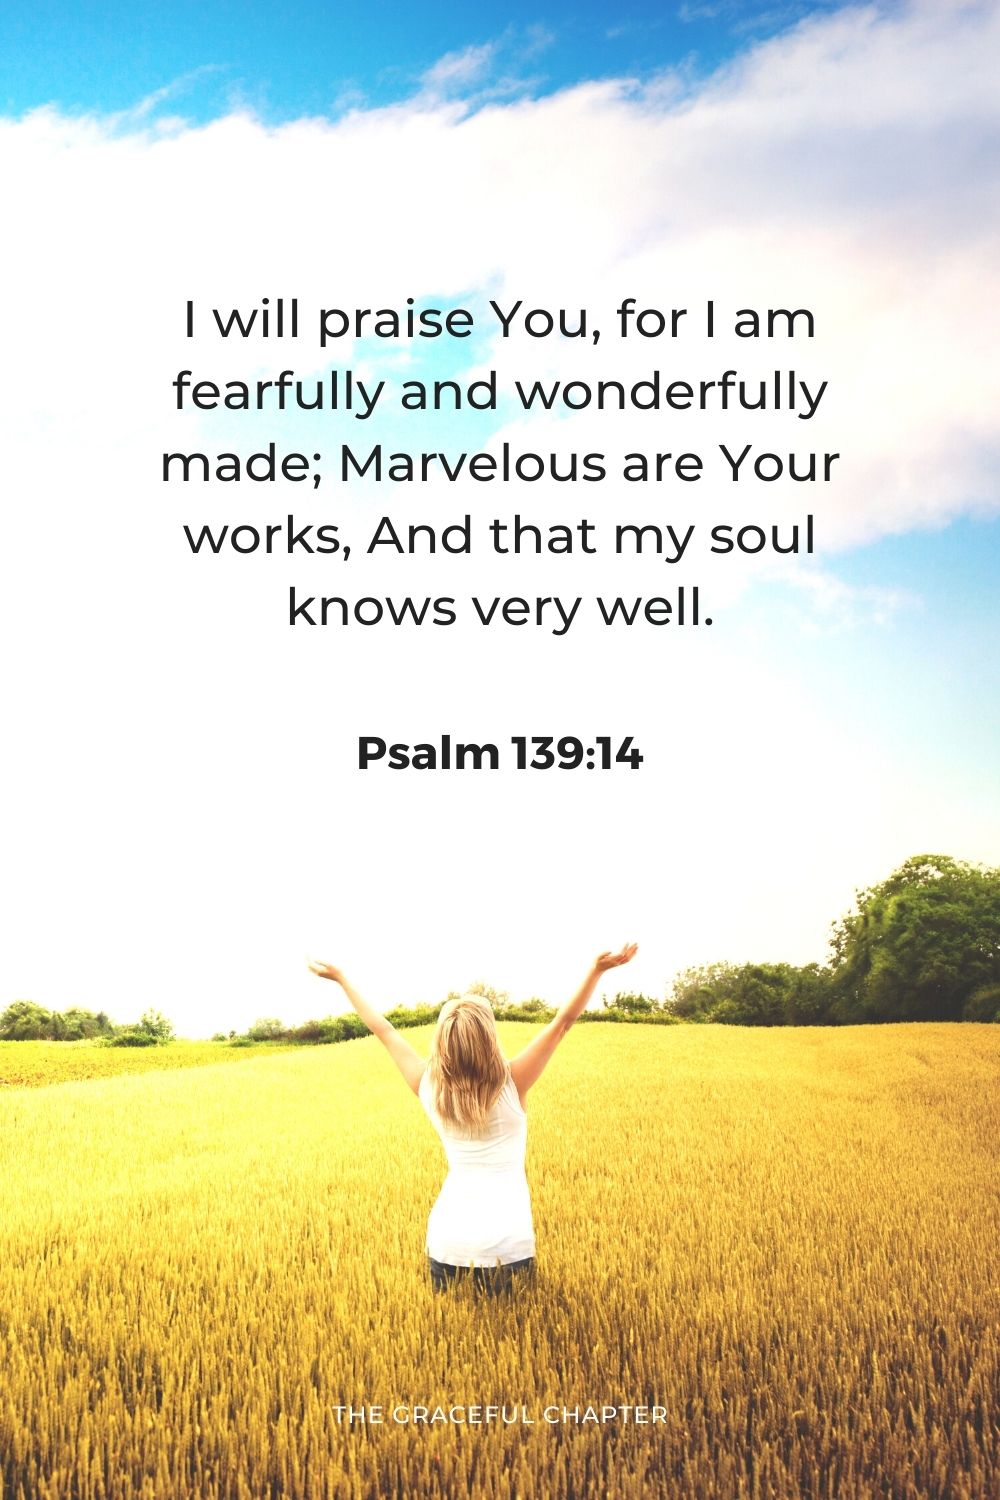 I will praise You, for I am fearfully and wonderfully made; Marvelous are Your works, And that my soul knows very well.